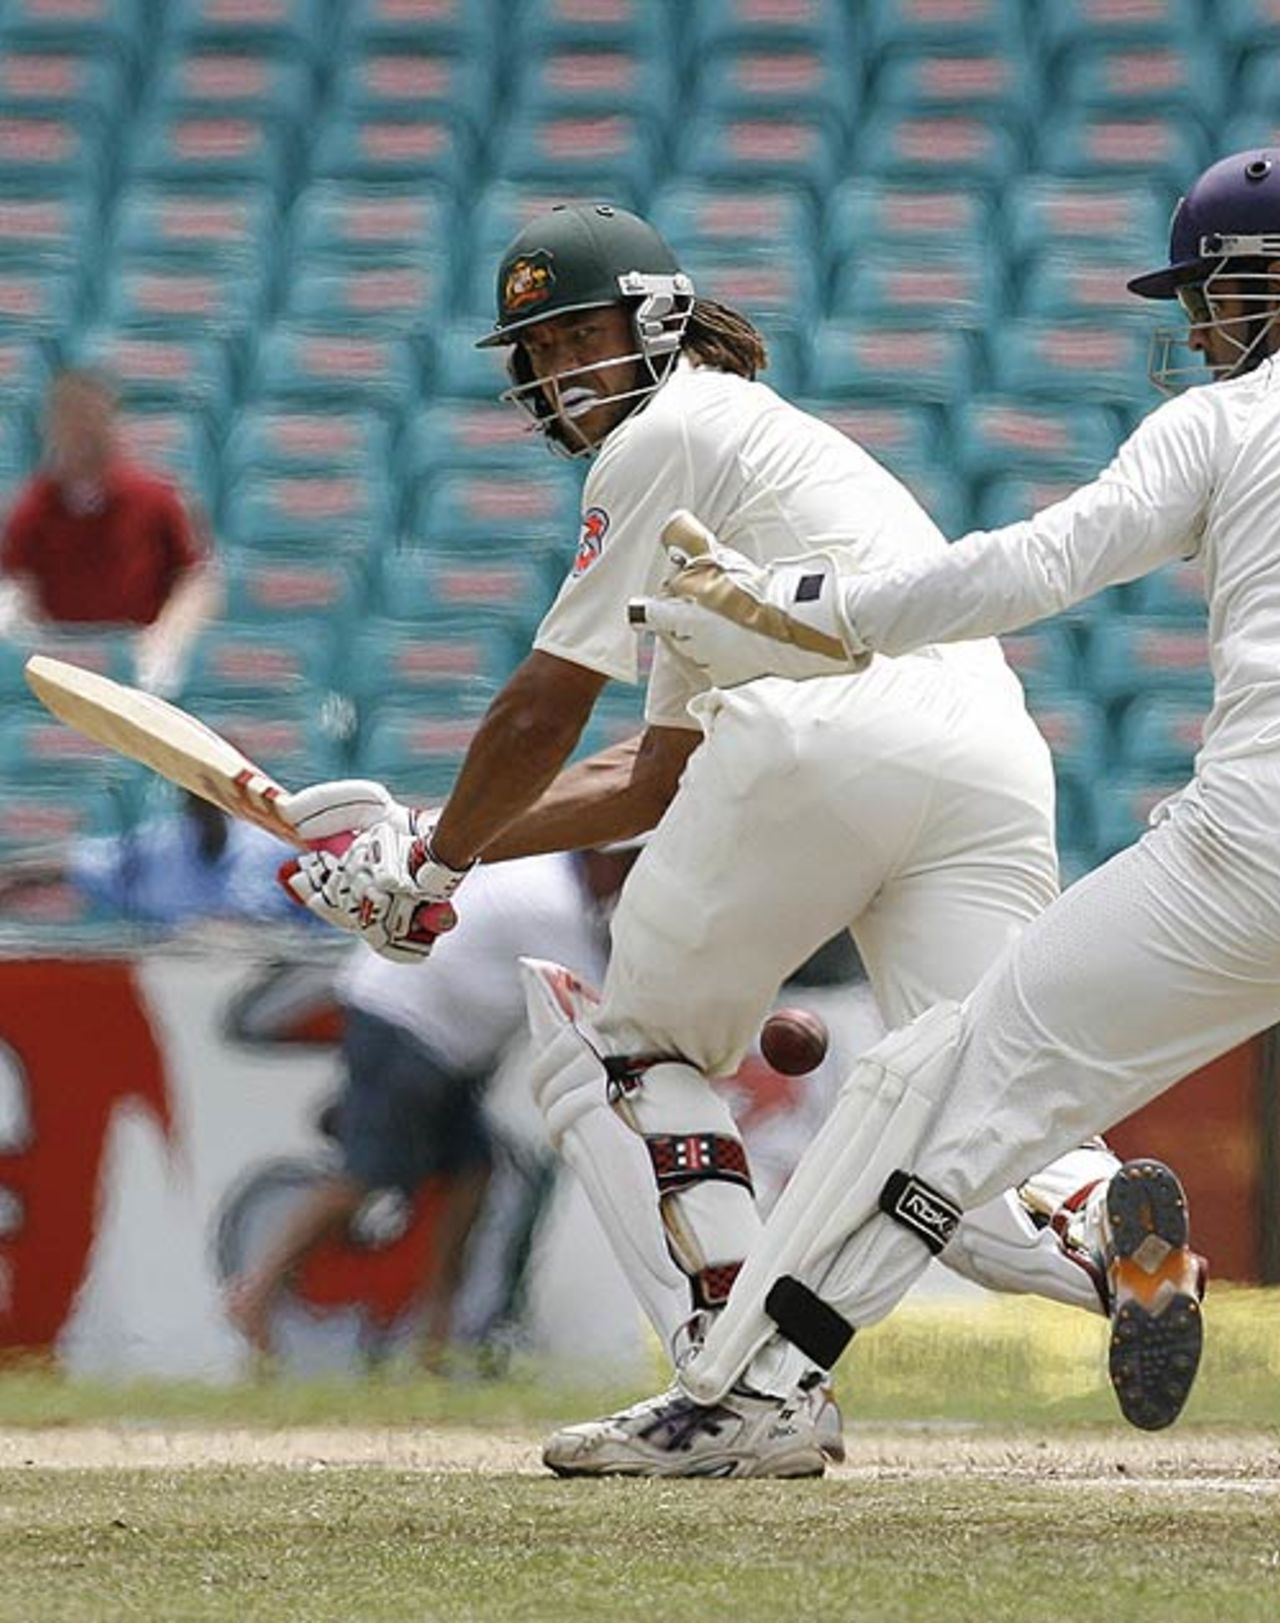 Andrew Symonds guides the ball fine, Australia v India, 2nd Test, Sydney, 5th day, January 6, 2008